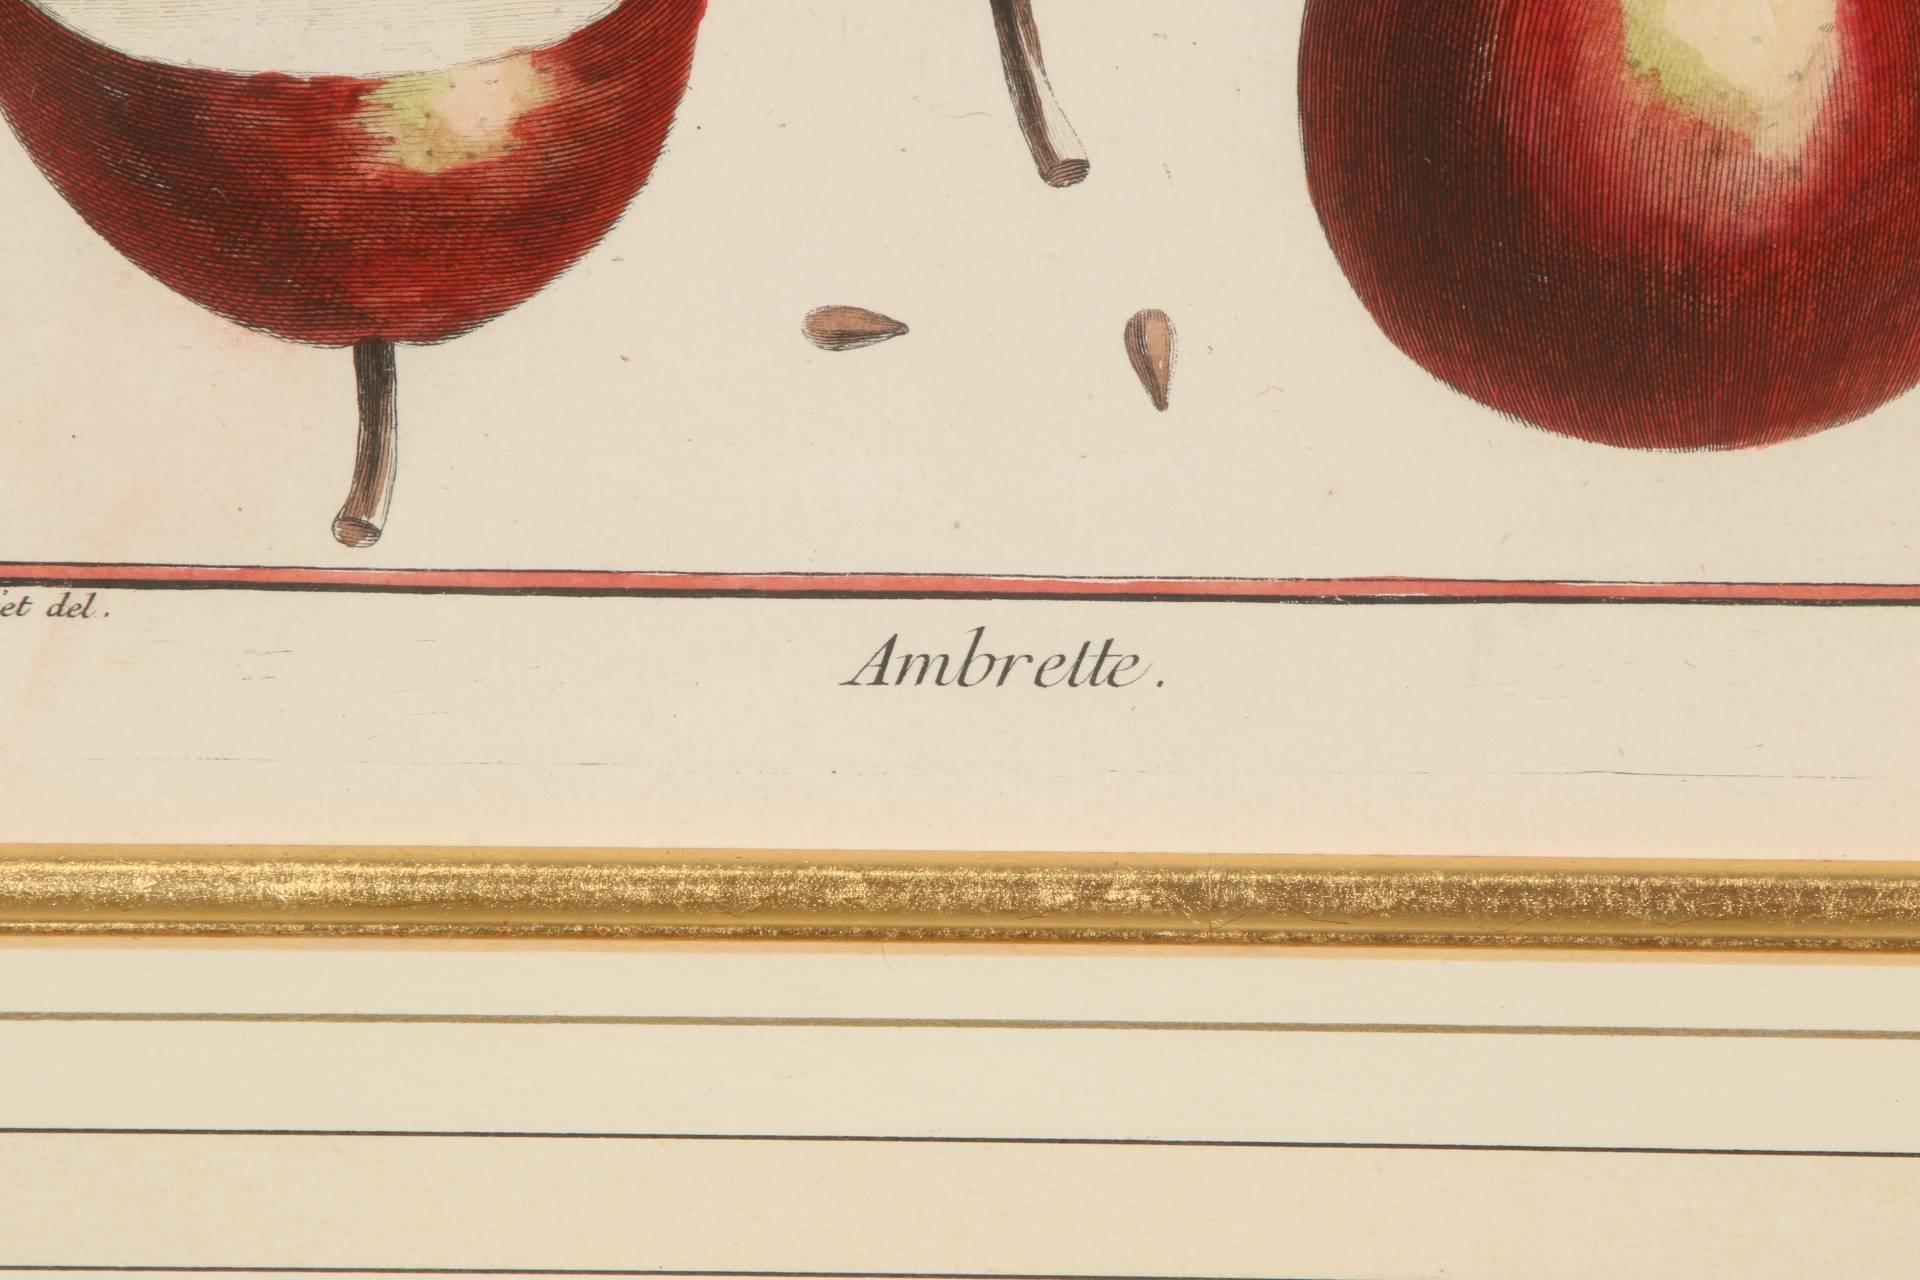 Pair of exquisite French fruit engravings from the 'Traite des Arbres Fruitiers' by M. DuHamel des Monceau of the Academie Royale des Sciences, Paris. Hand colored in watercolor. Presented in burl wood and gilt rope frame, well matted, gilt